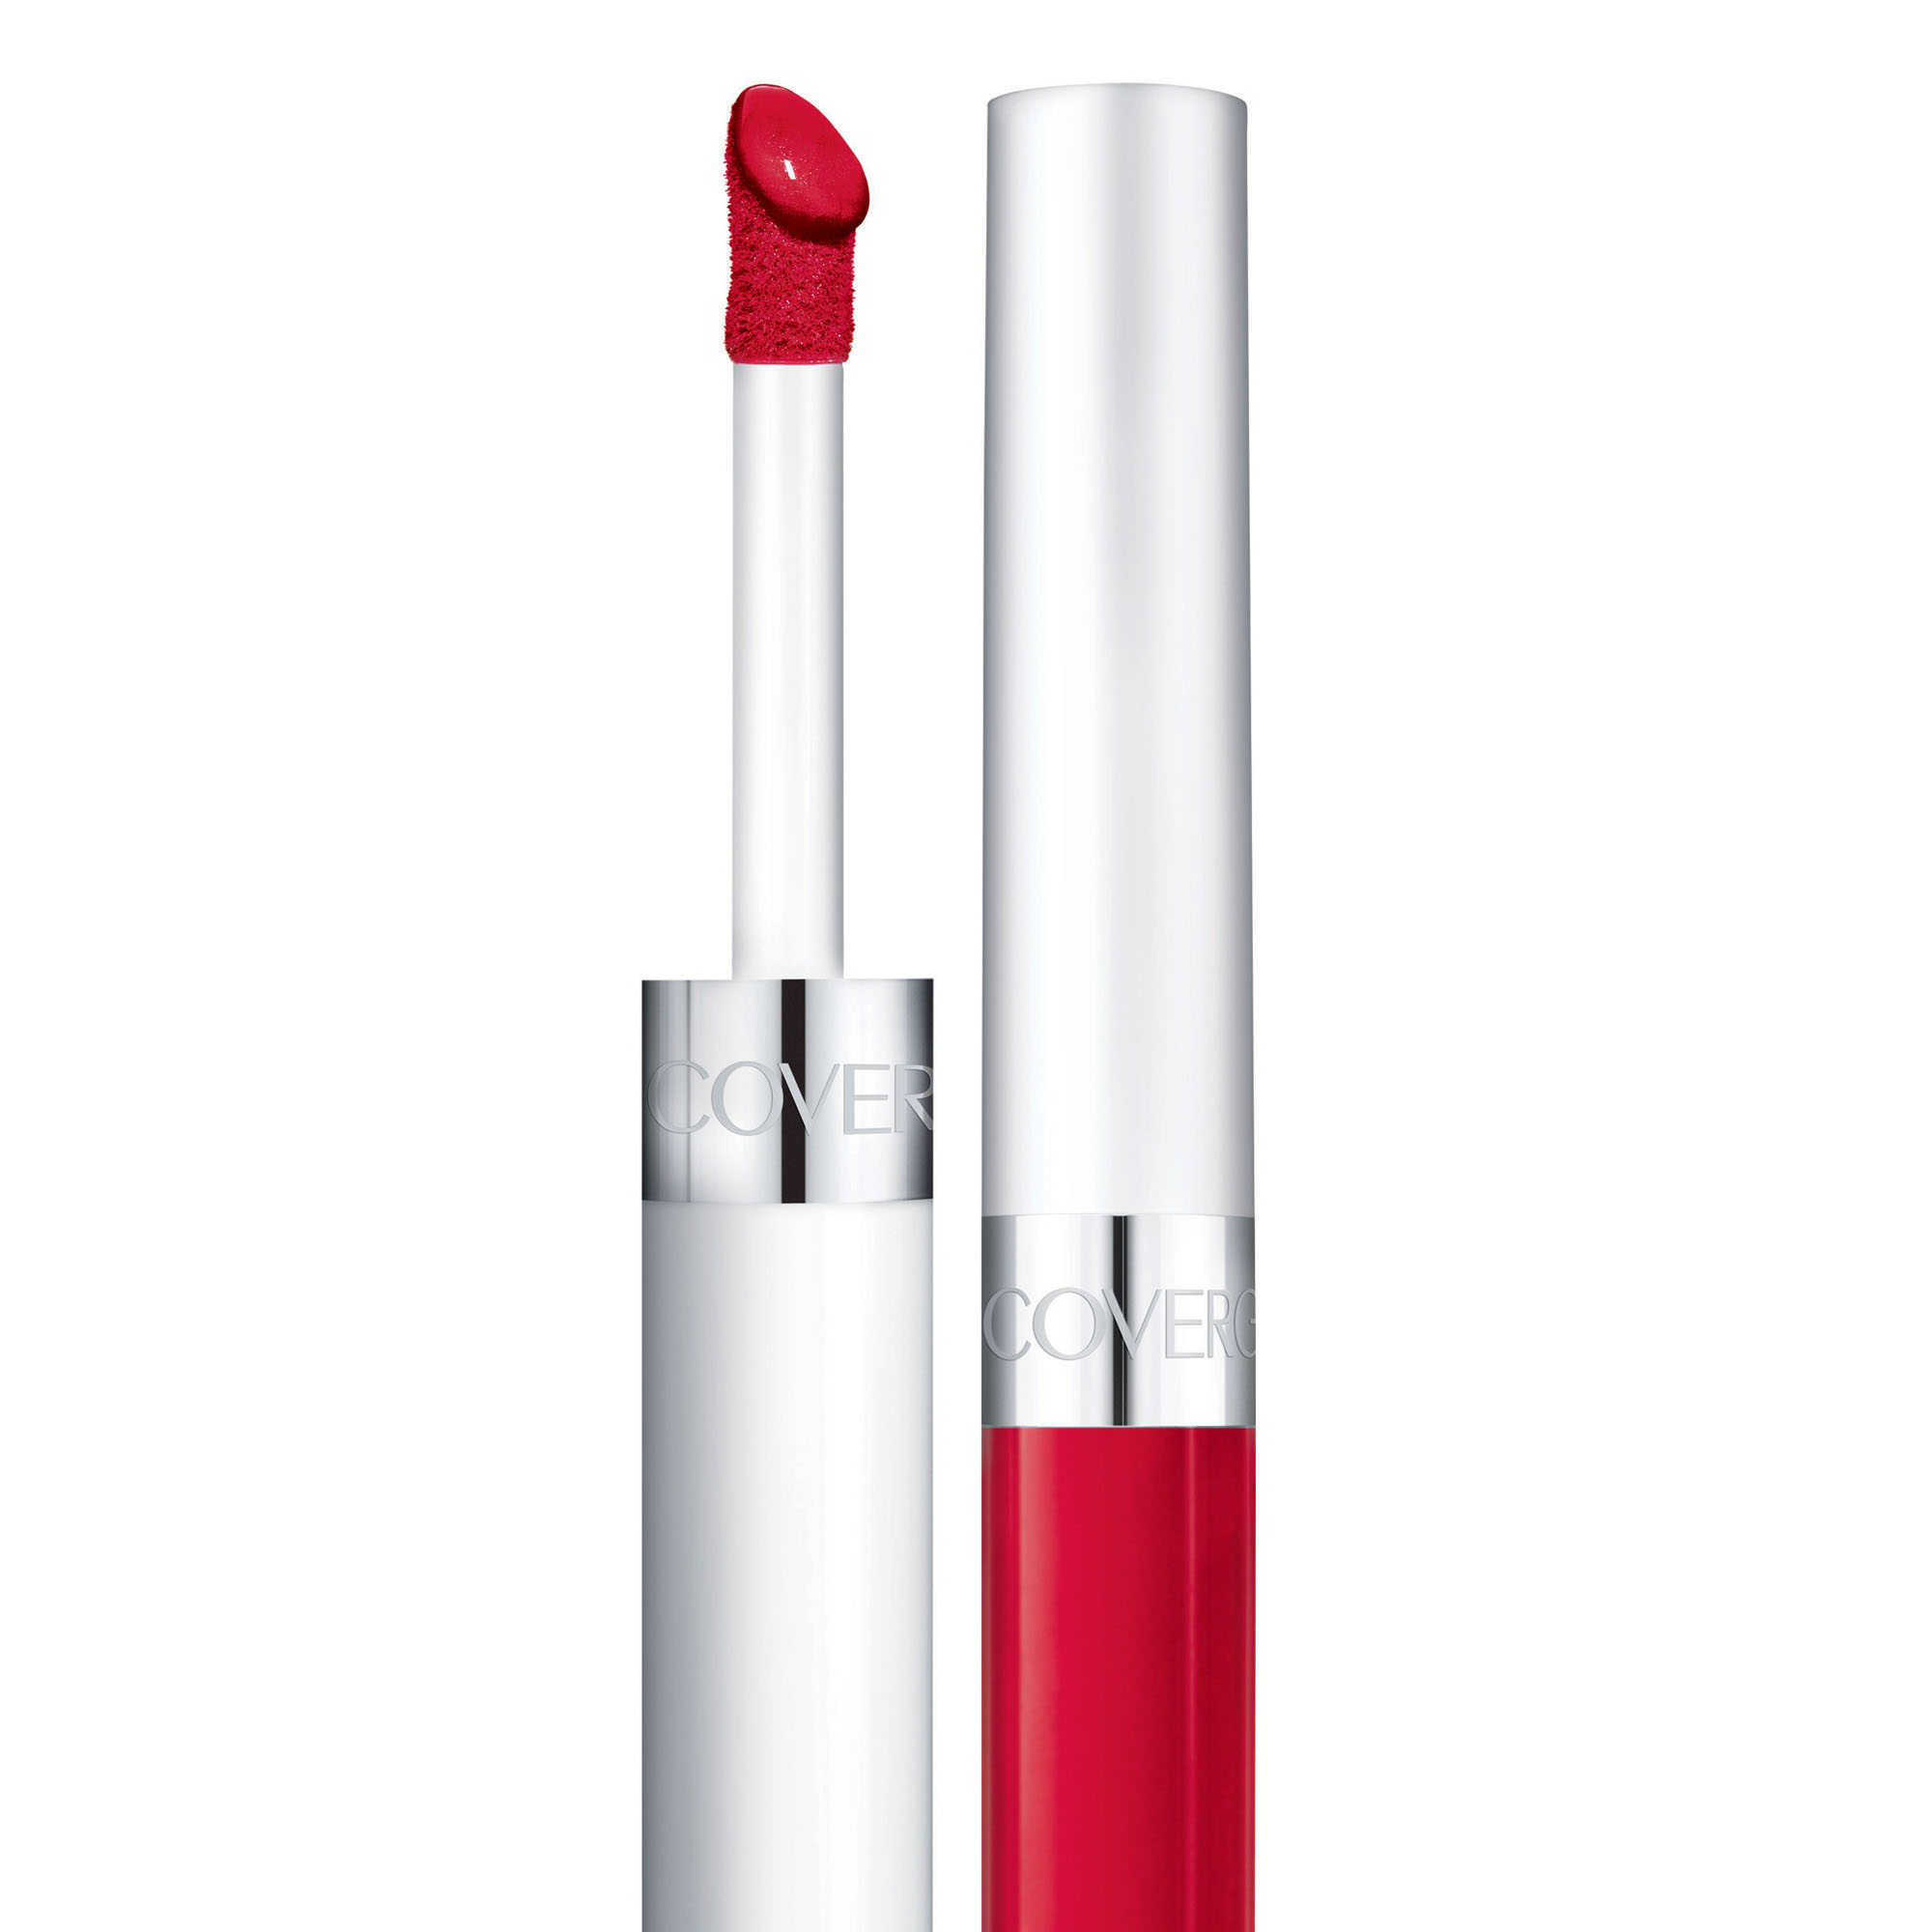 COVERGIRL Outlast All-Day Moisturizing Lip Color, Ultra Violet - image 1 of 5